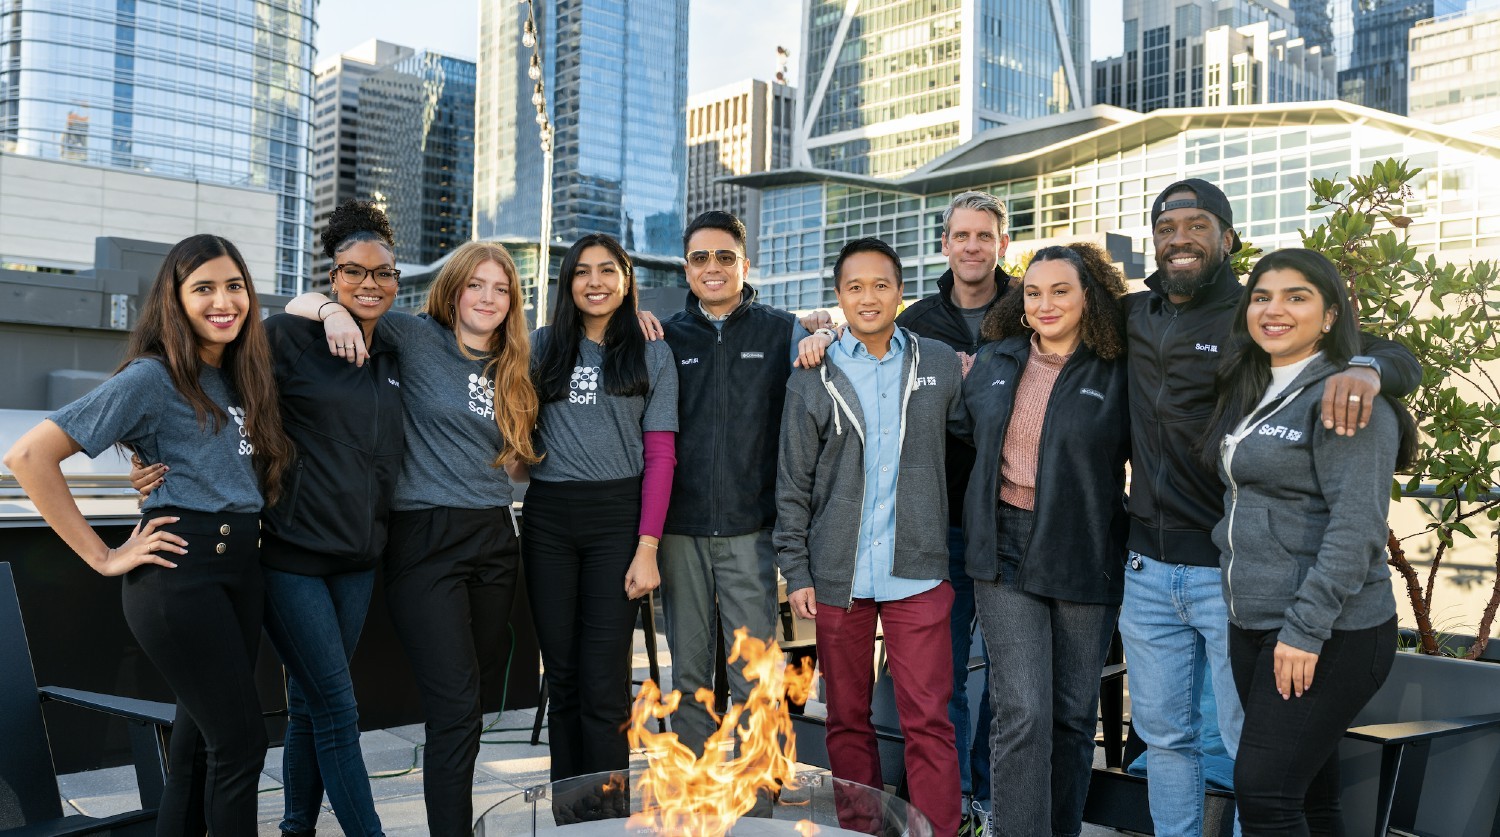 Employees enjoying our rooftop fire pit in San Francisco, CA.  